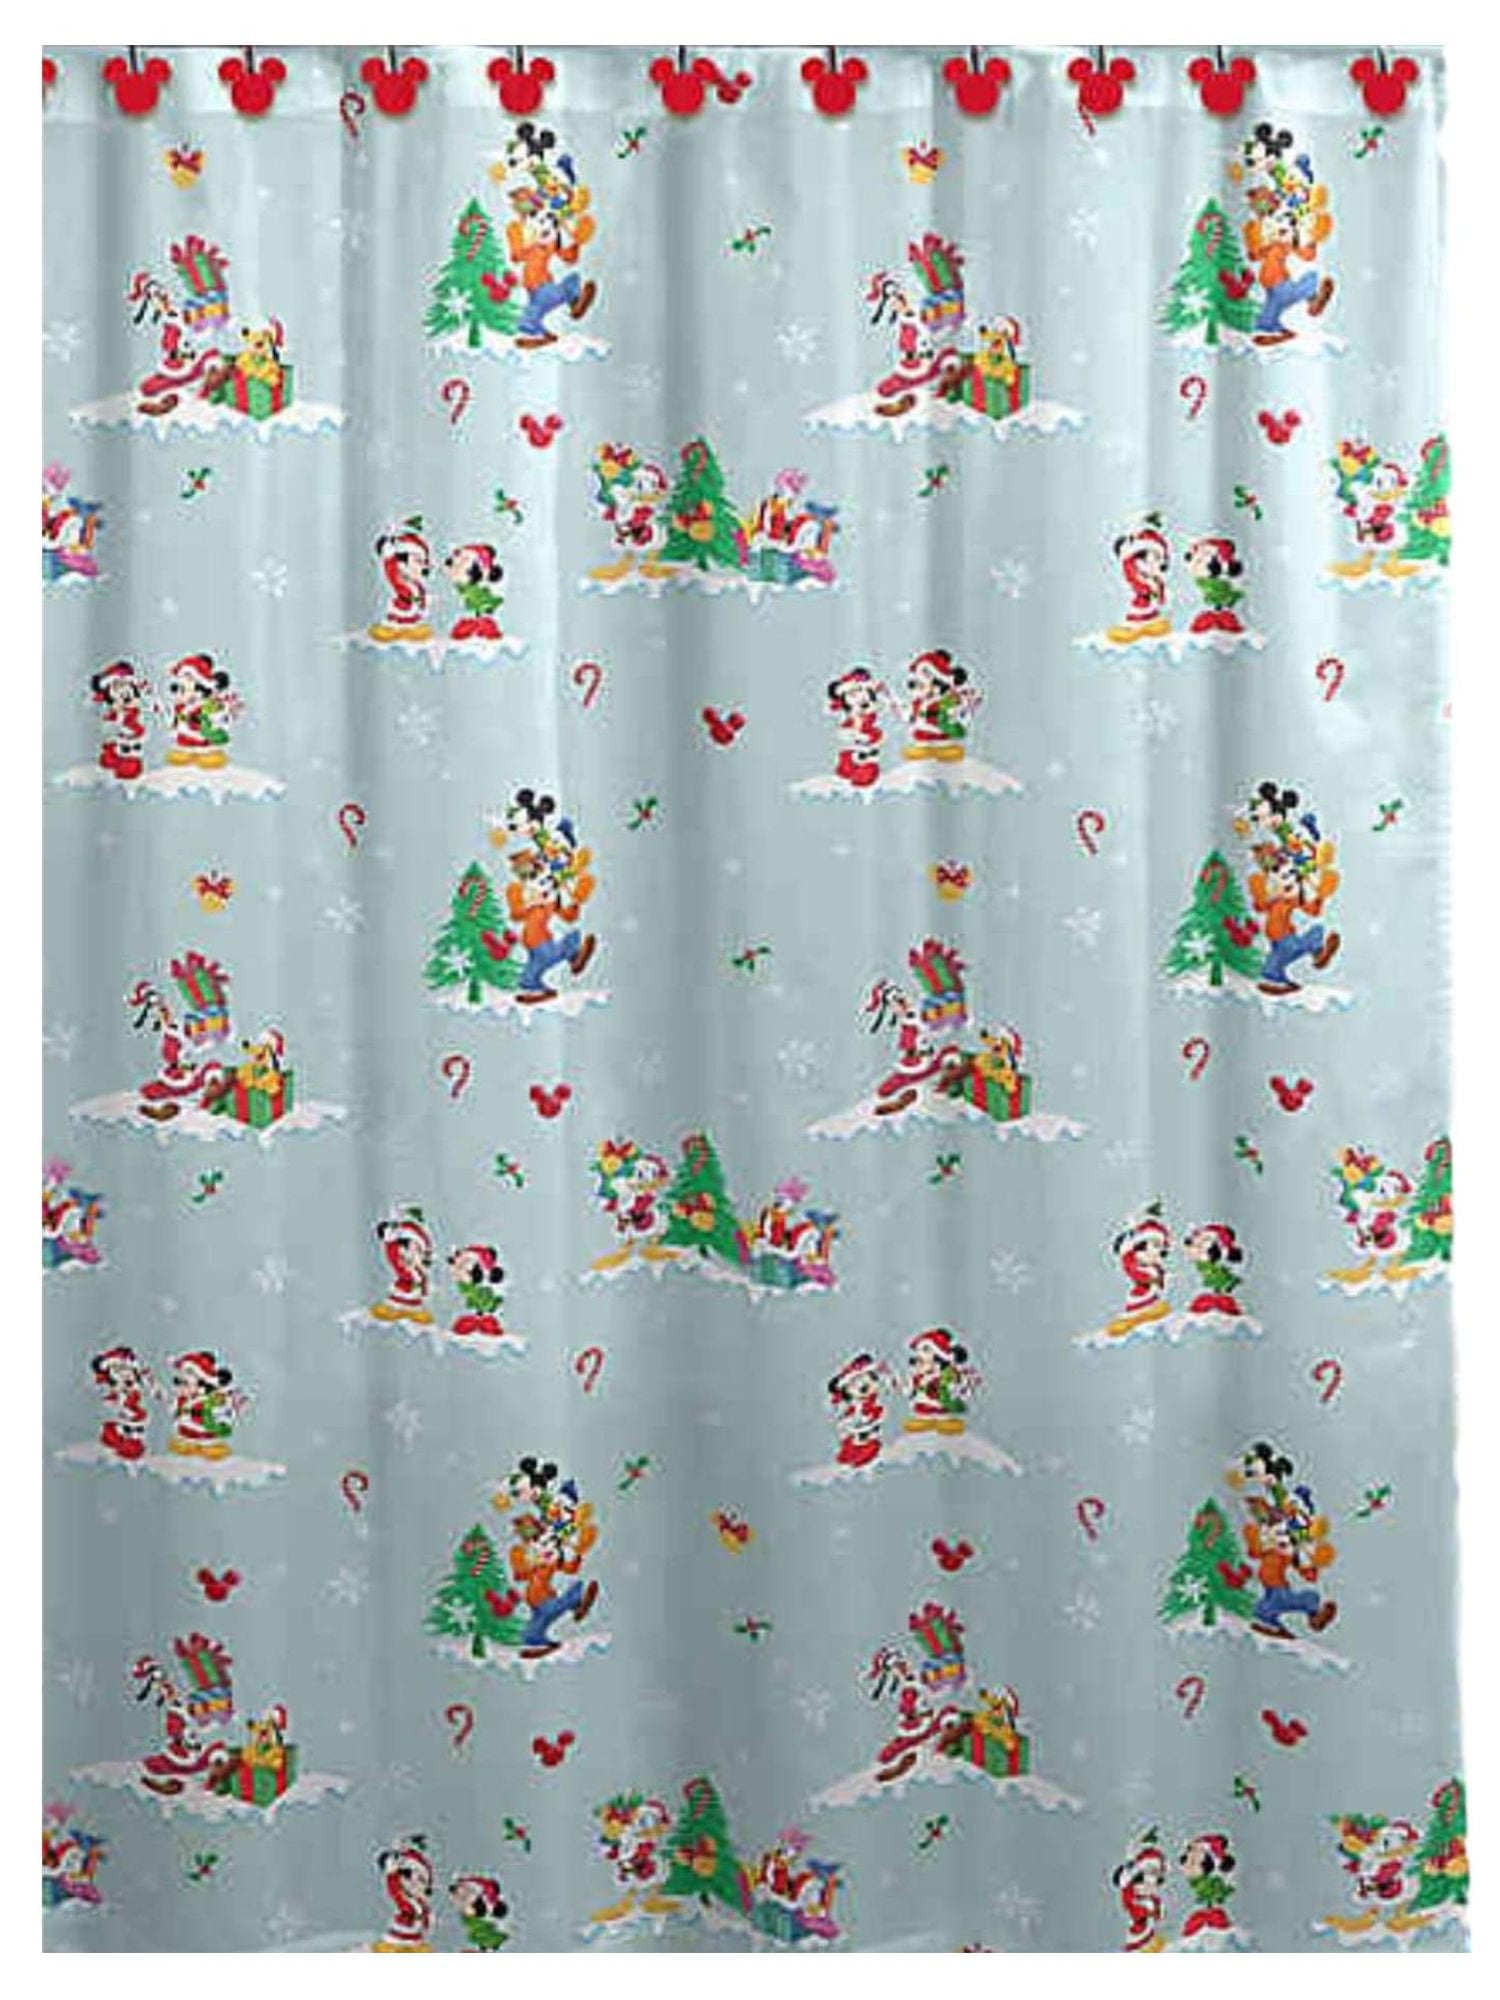 Disney Mickey & Minnie Mouse Holiday Christmas Shower